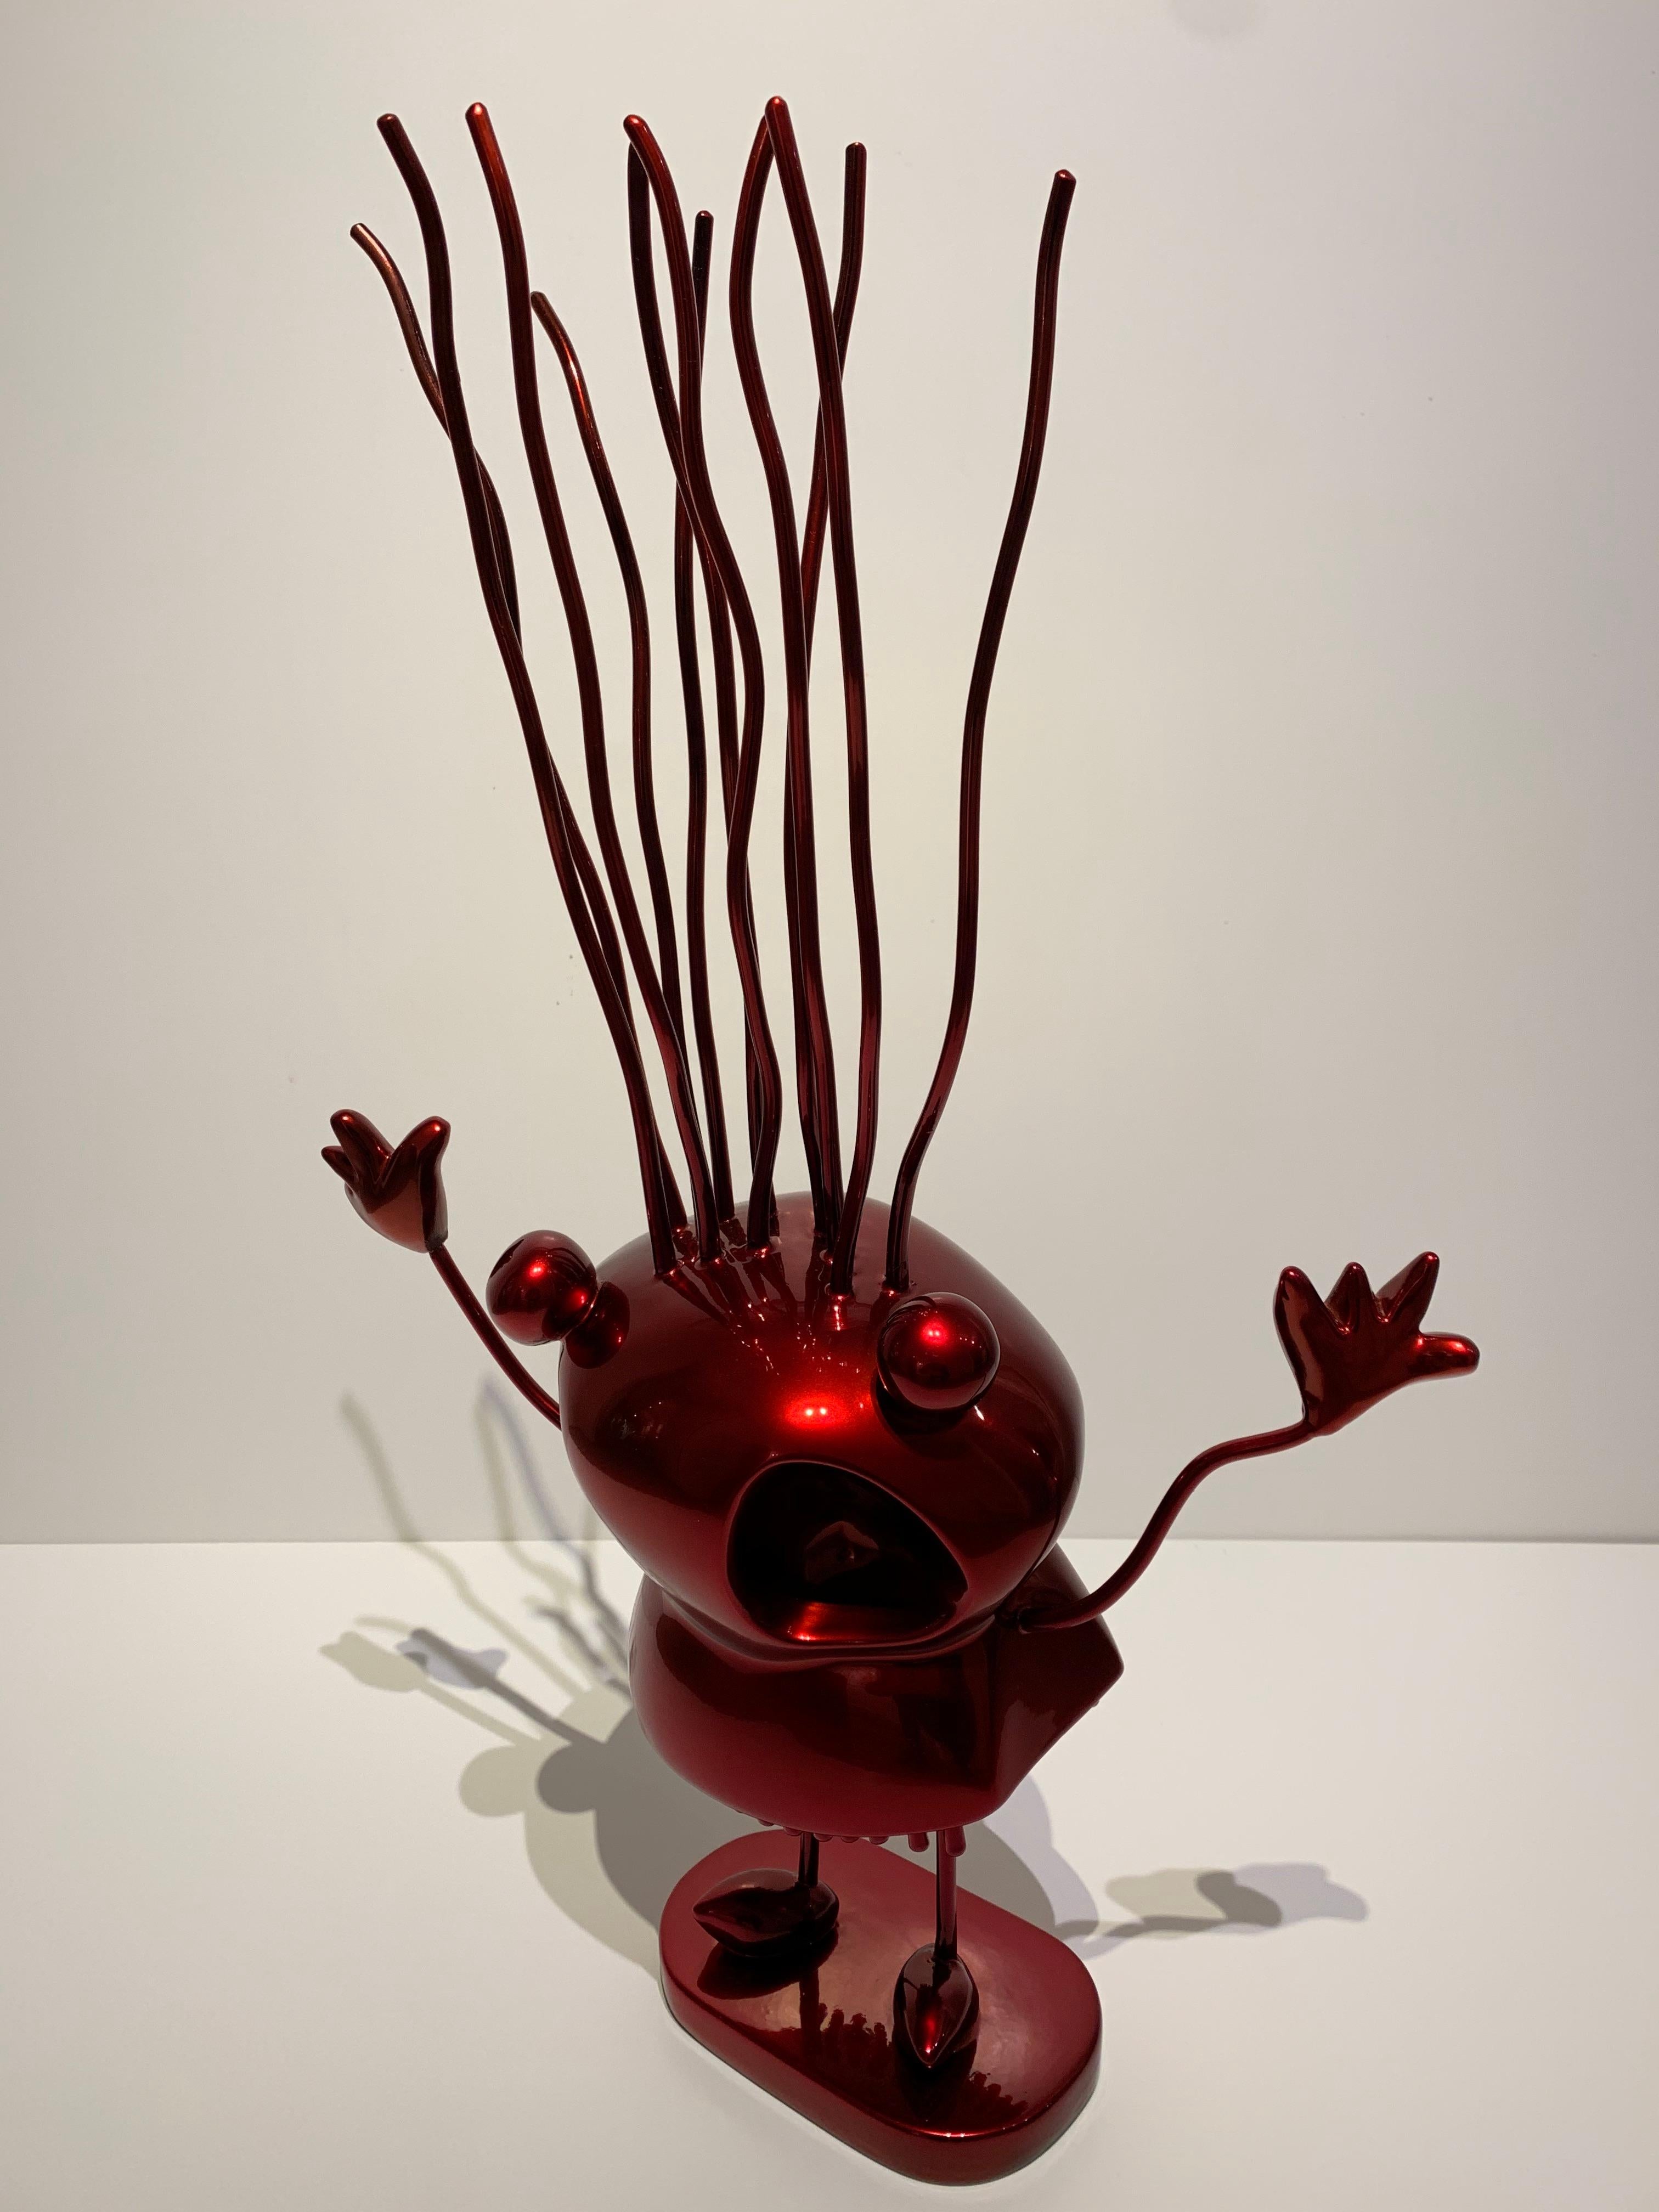 Xavi Carbonell, Le Petite Folle, 2019, Hi-Gloss Red Painted Sculpture 3